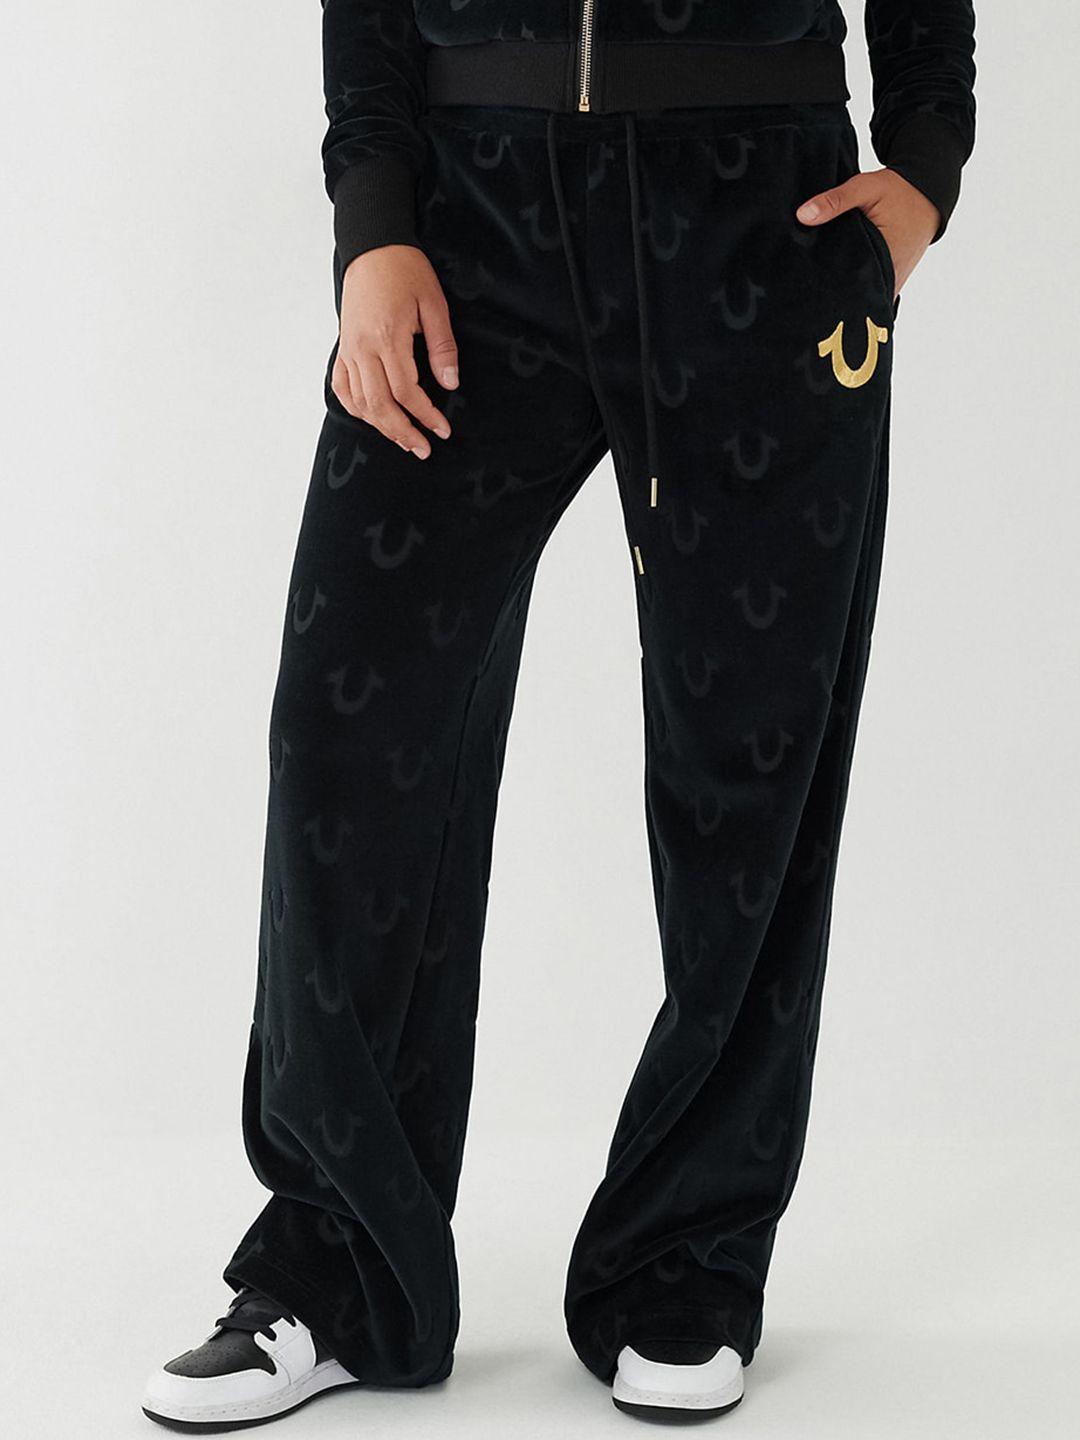 true-religion-women-self-design-textured-relaxed-fit-mid-rise-track-pants